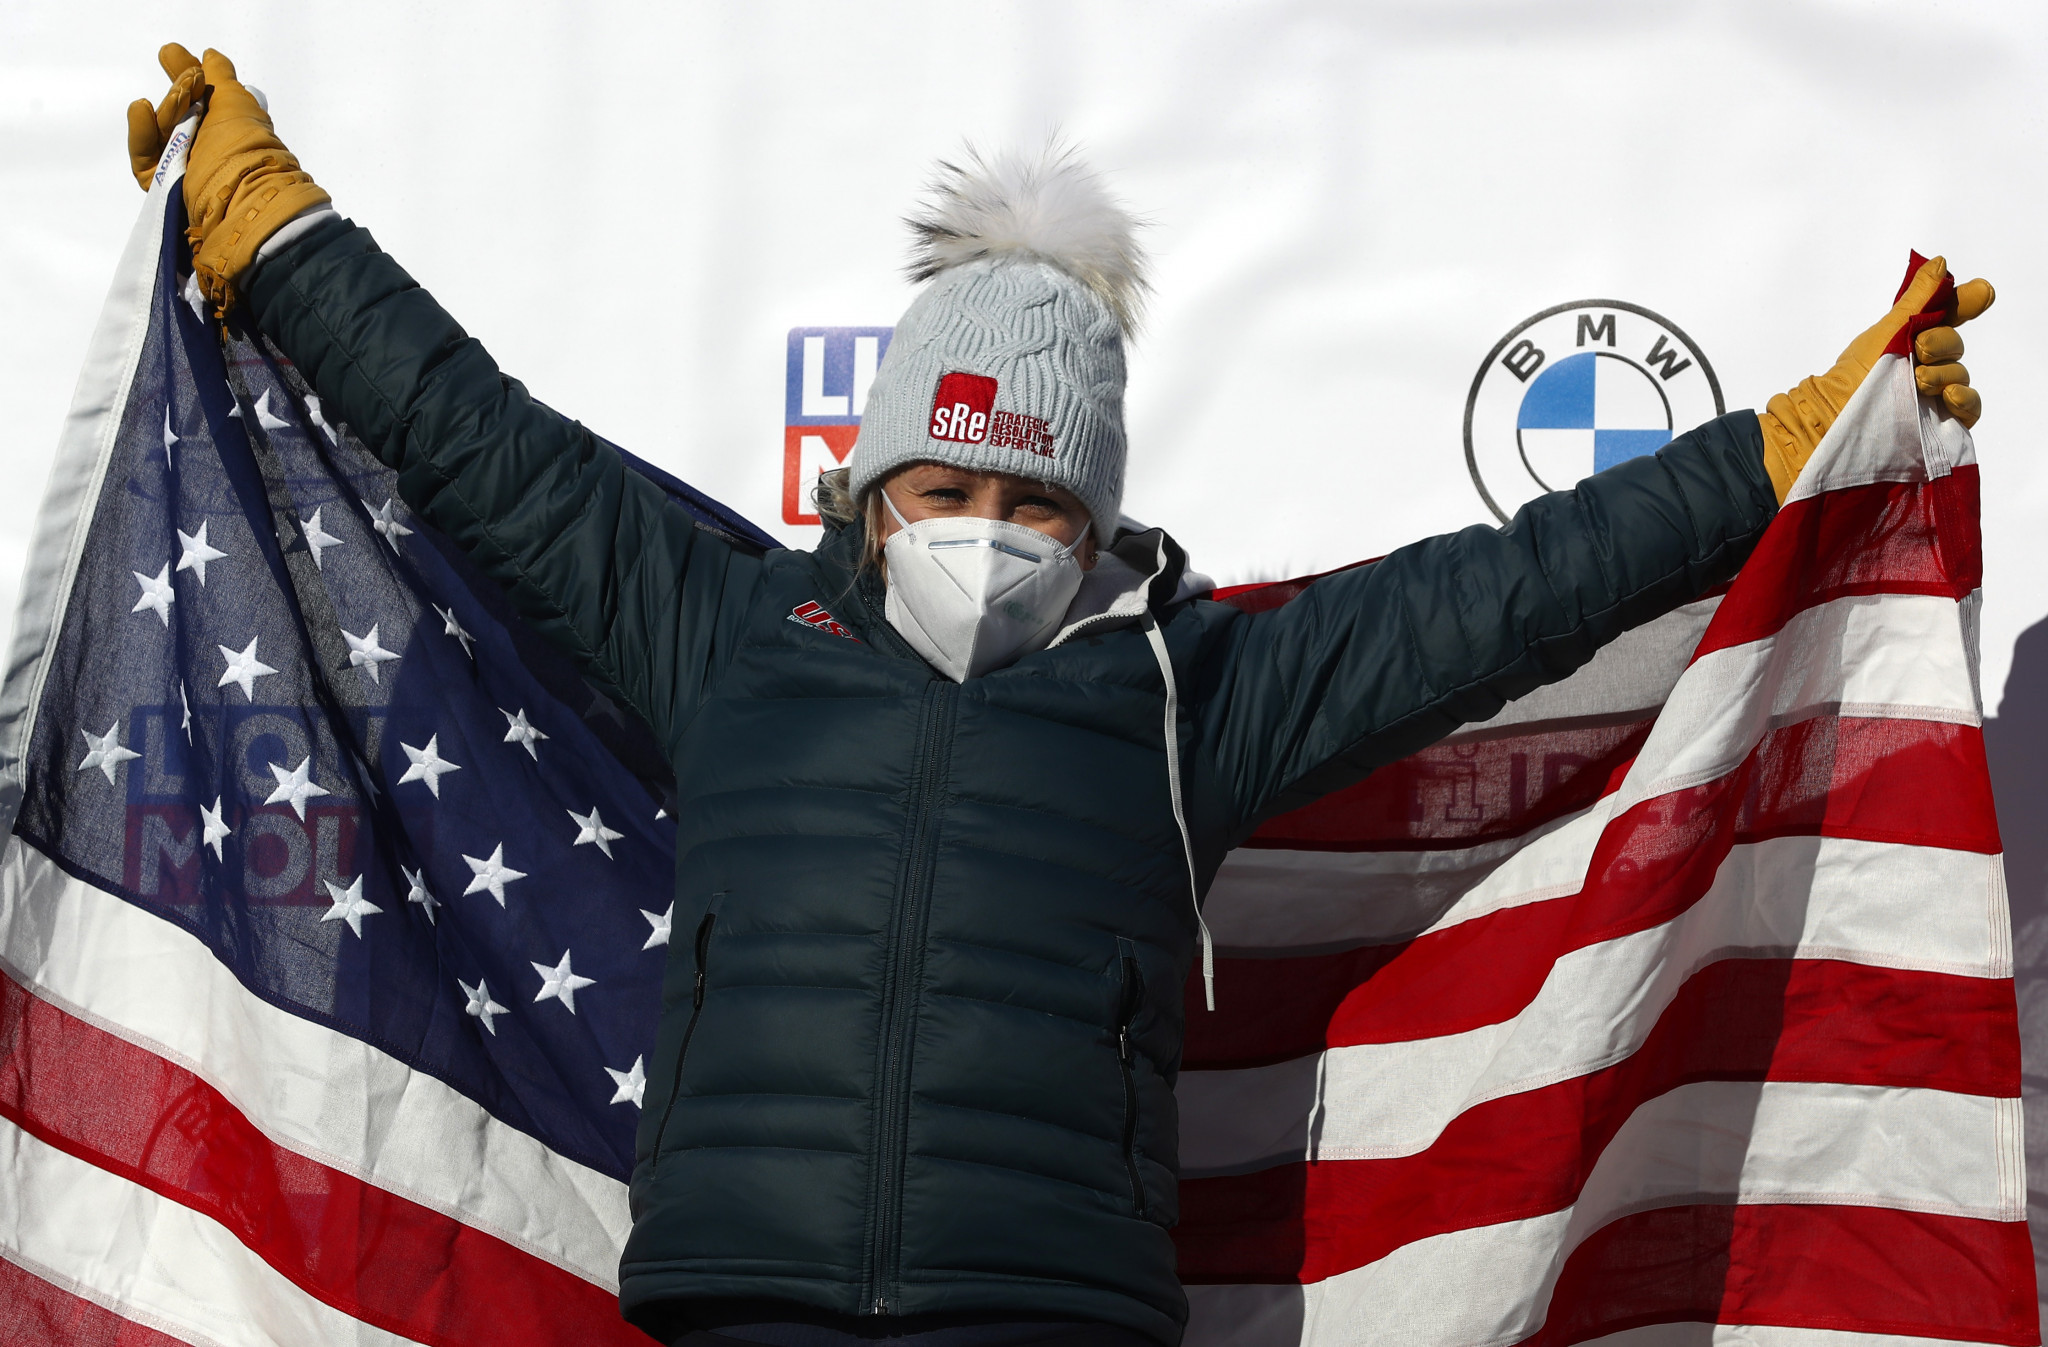 Kaillie Humphries won the women's monobob and two-woman bobsleigh competitions in Altenberg ©Getty Images